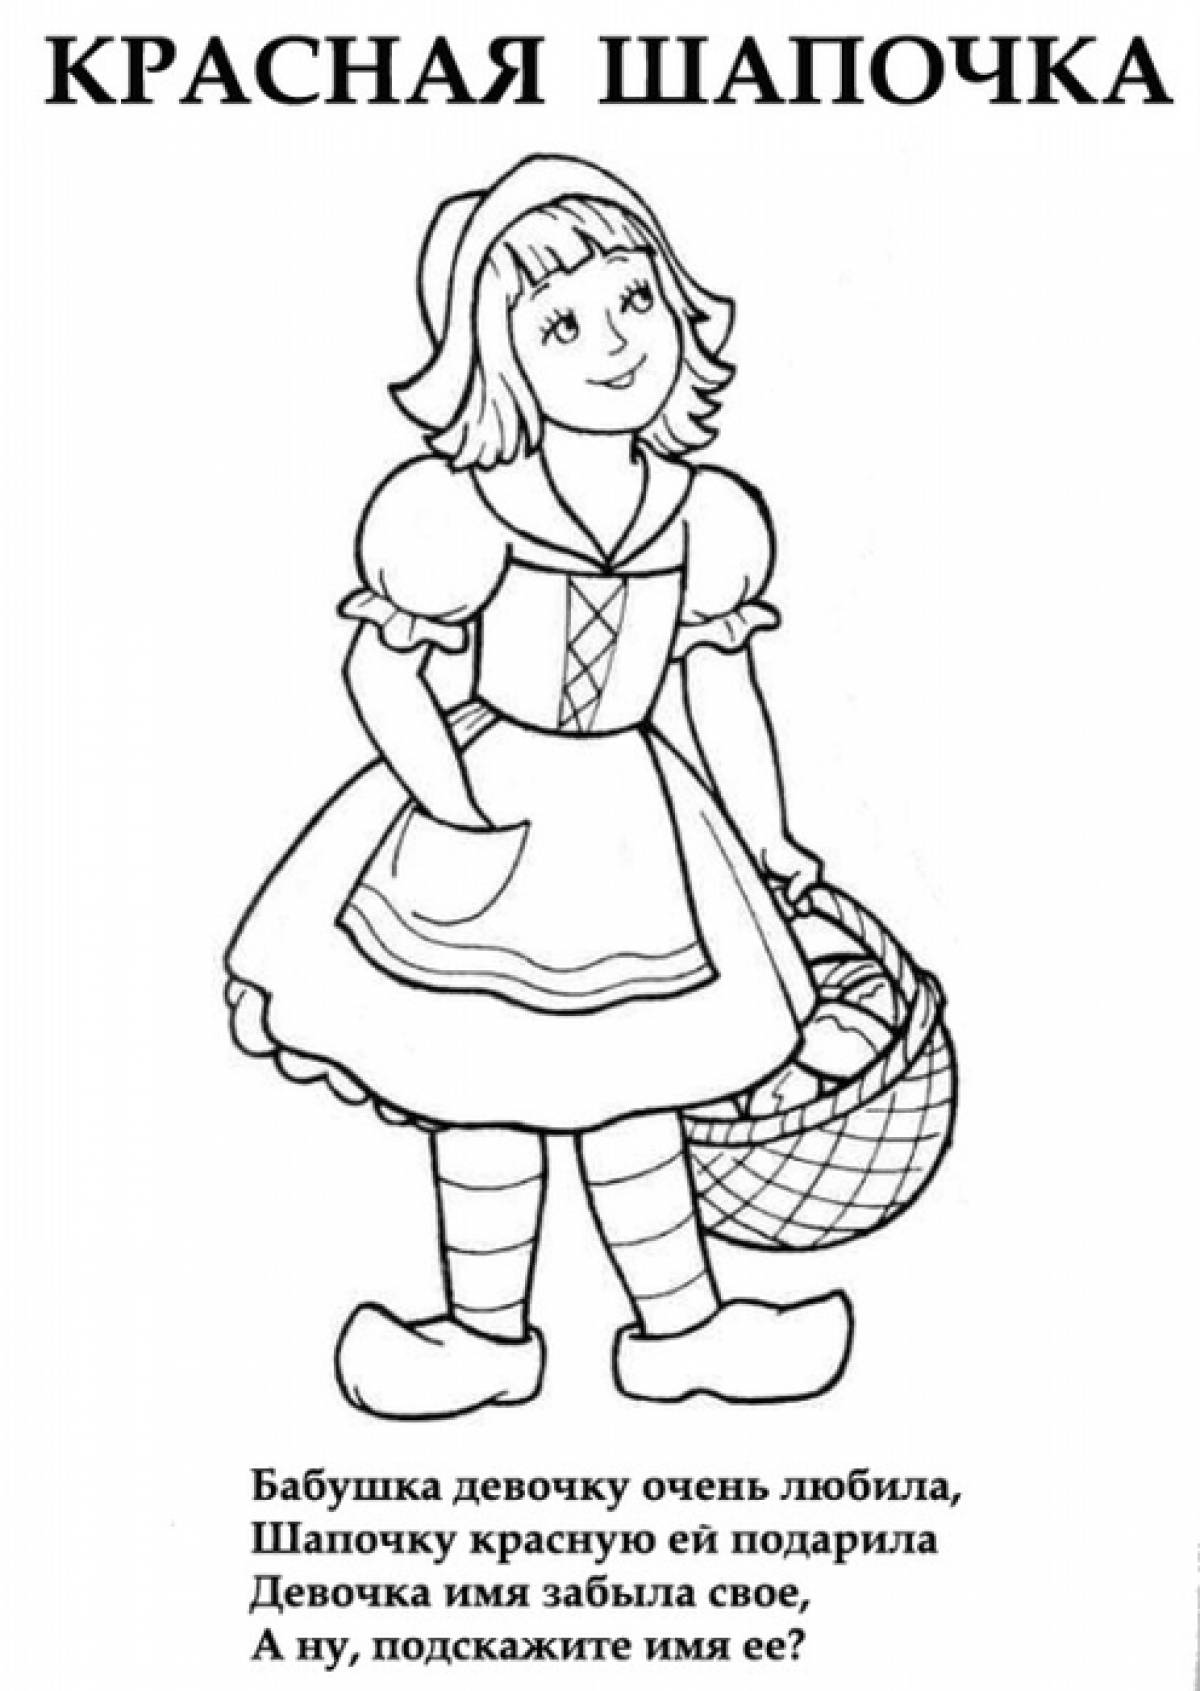 Little Red Riding Hood with a basket